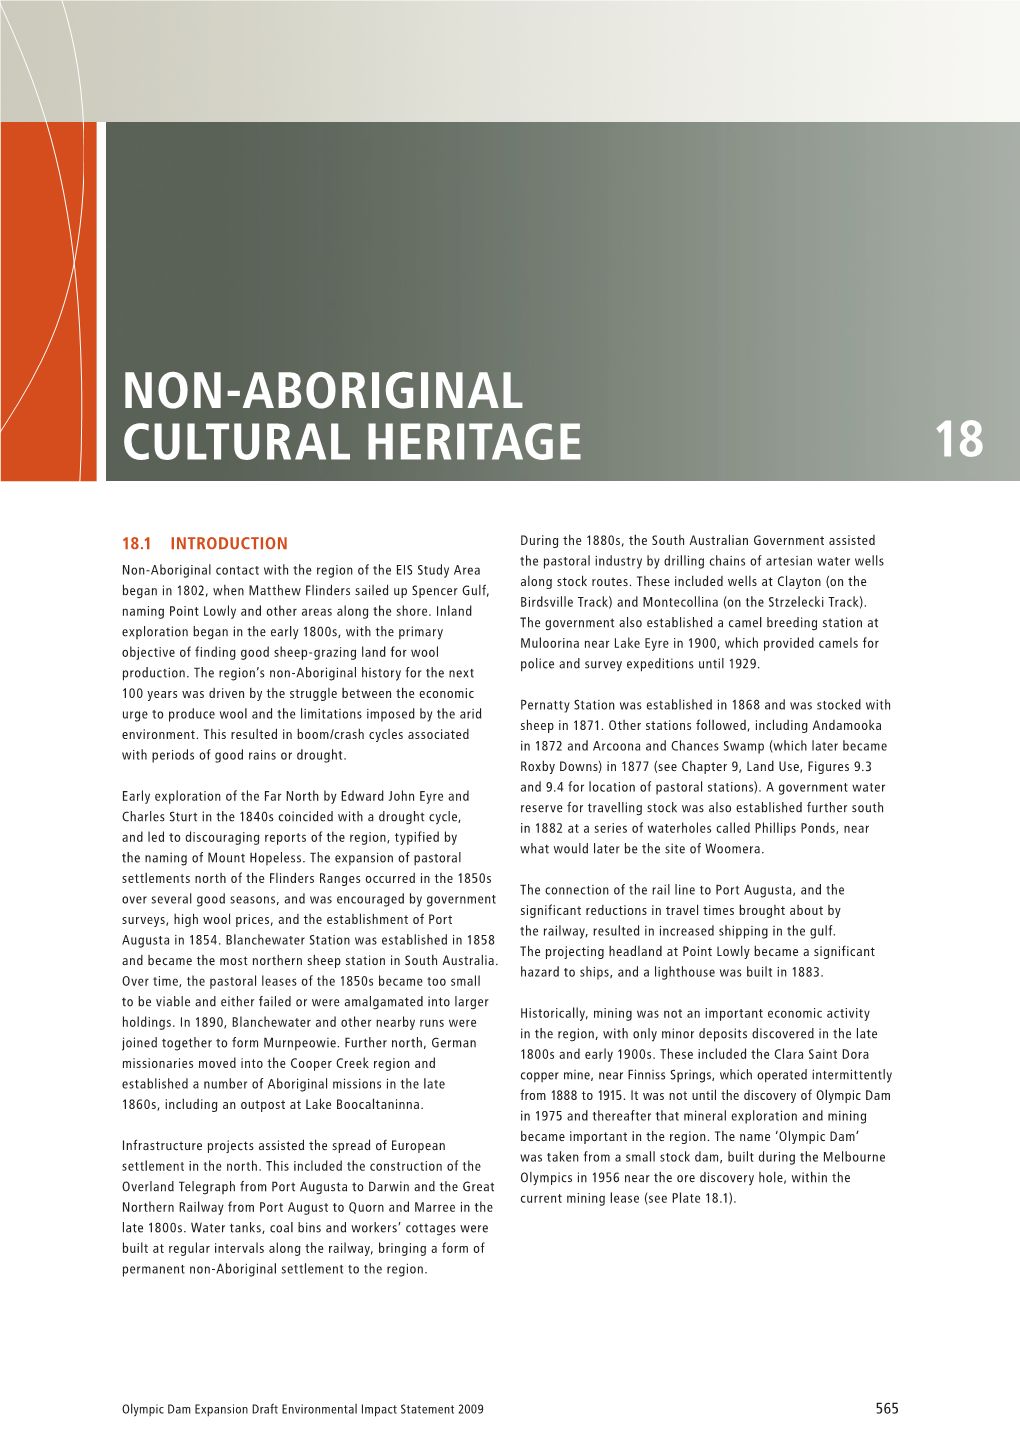 Chapter 18 Non-Aboriginal Cultural Heritage